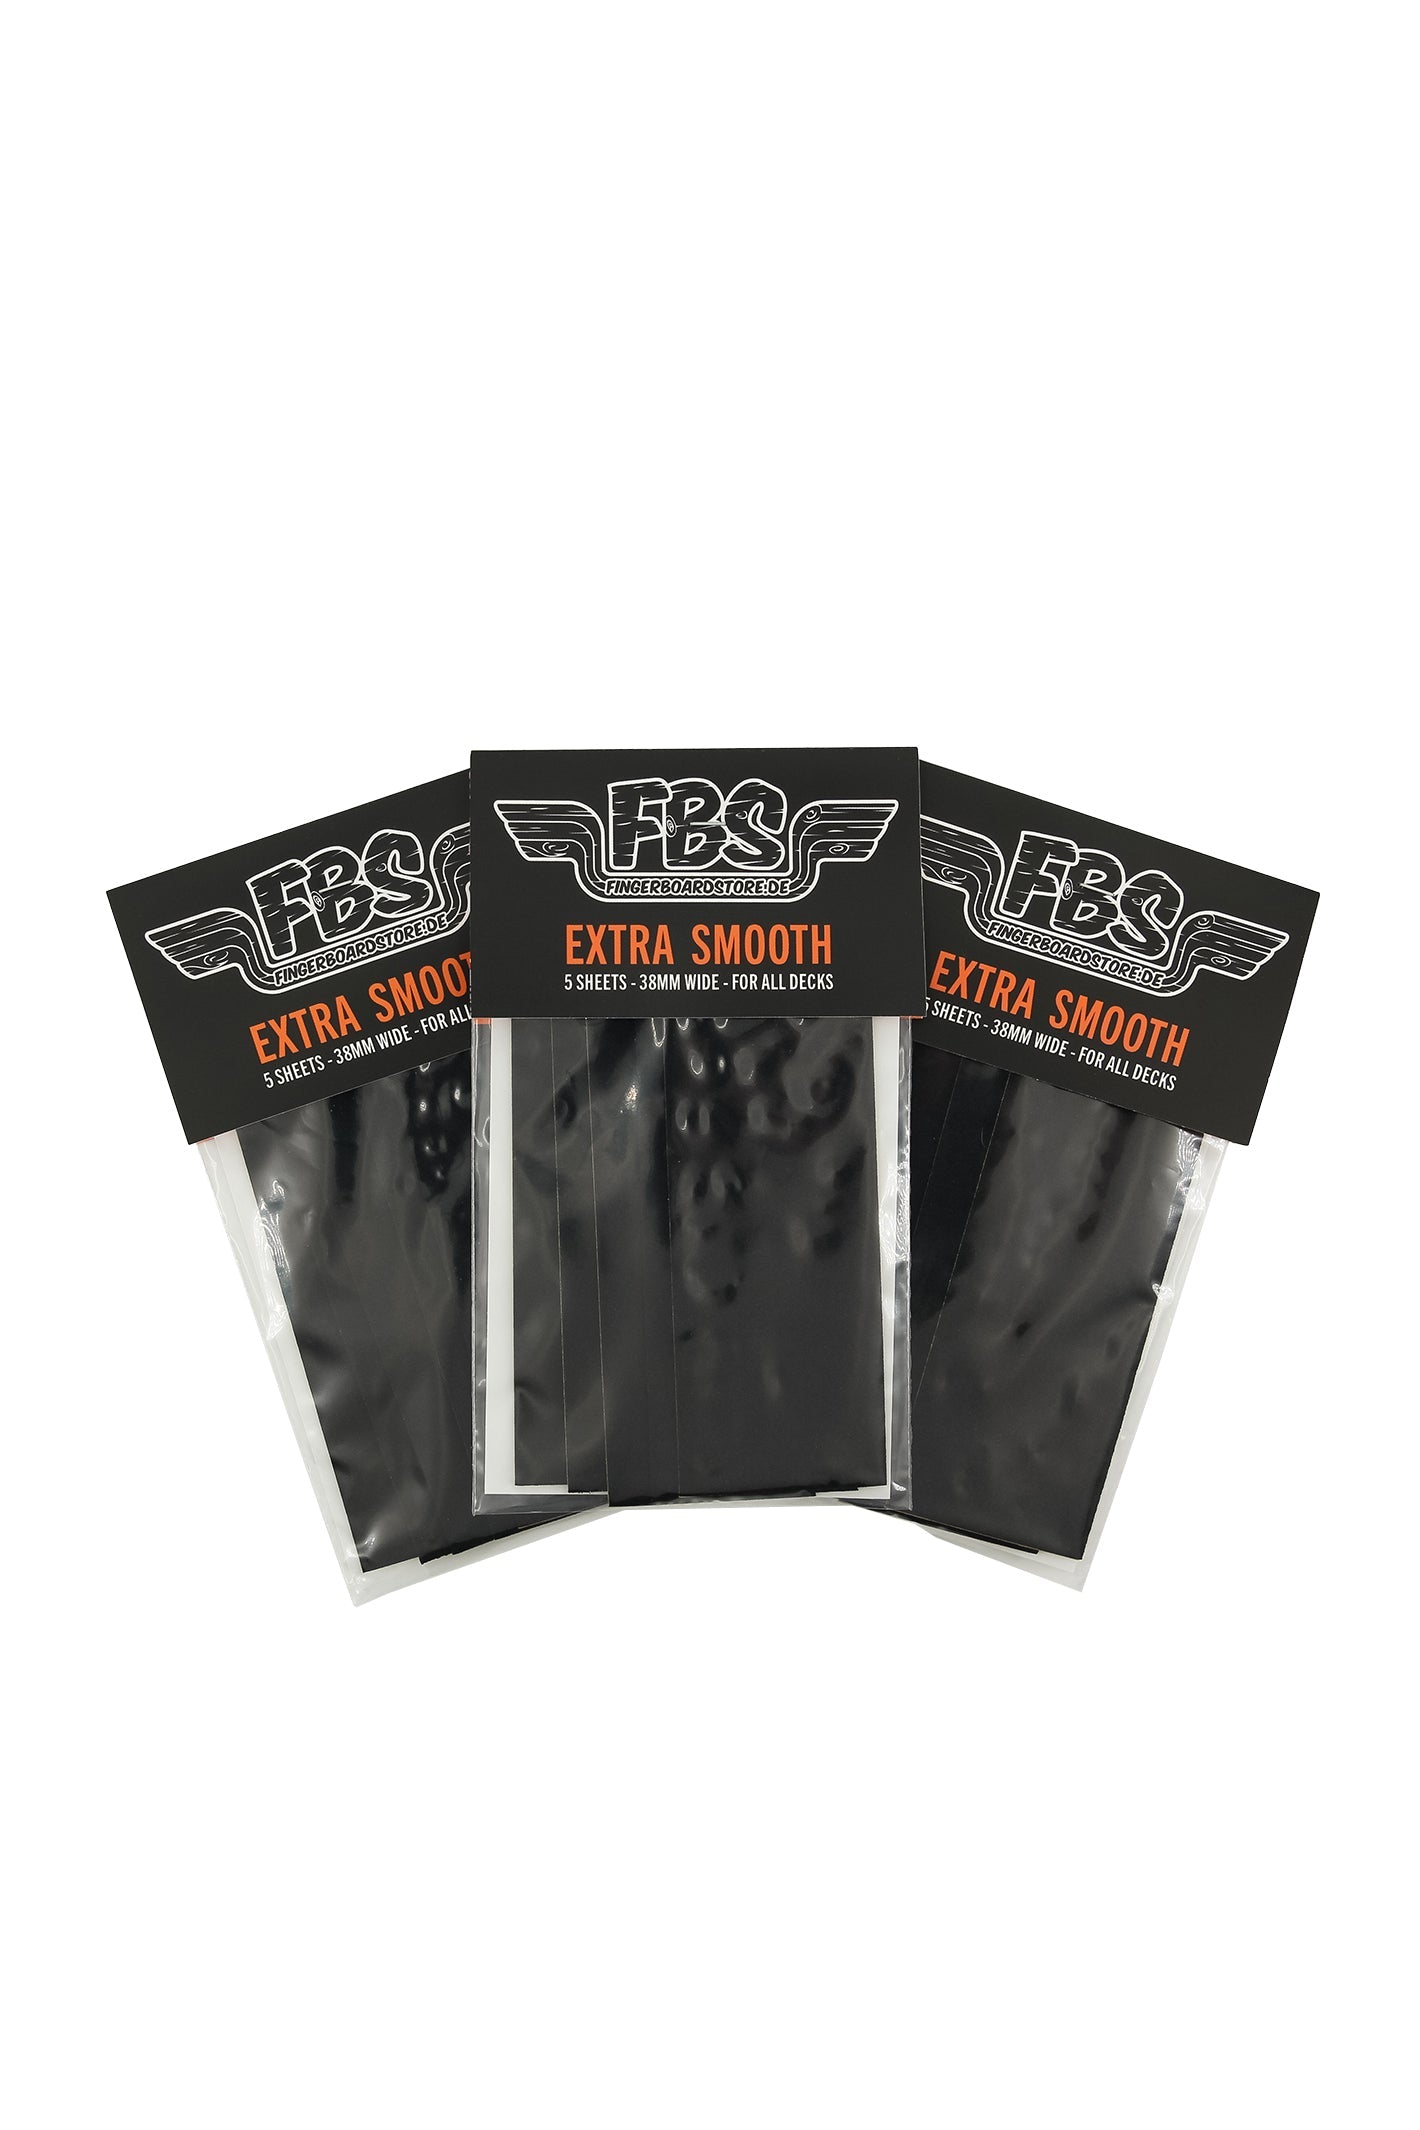 FBS Extra Smooth (3 packs)